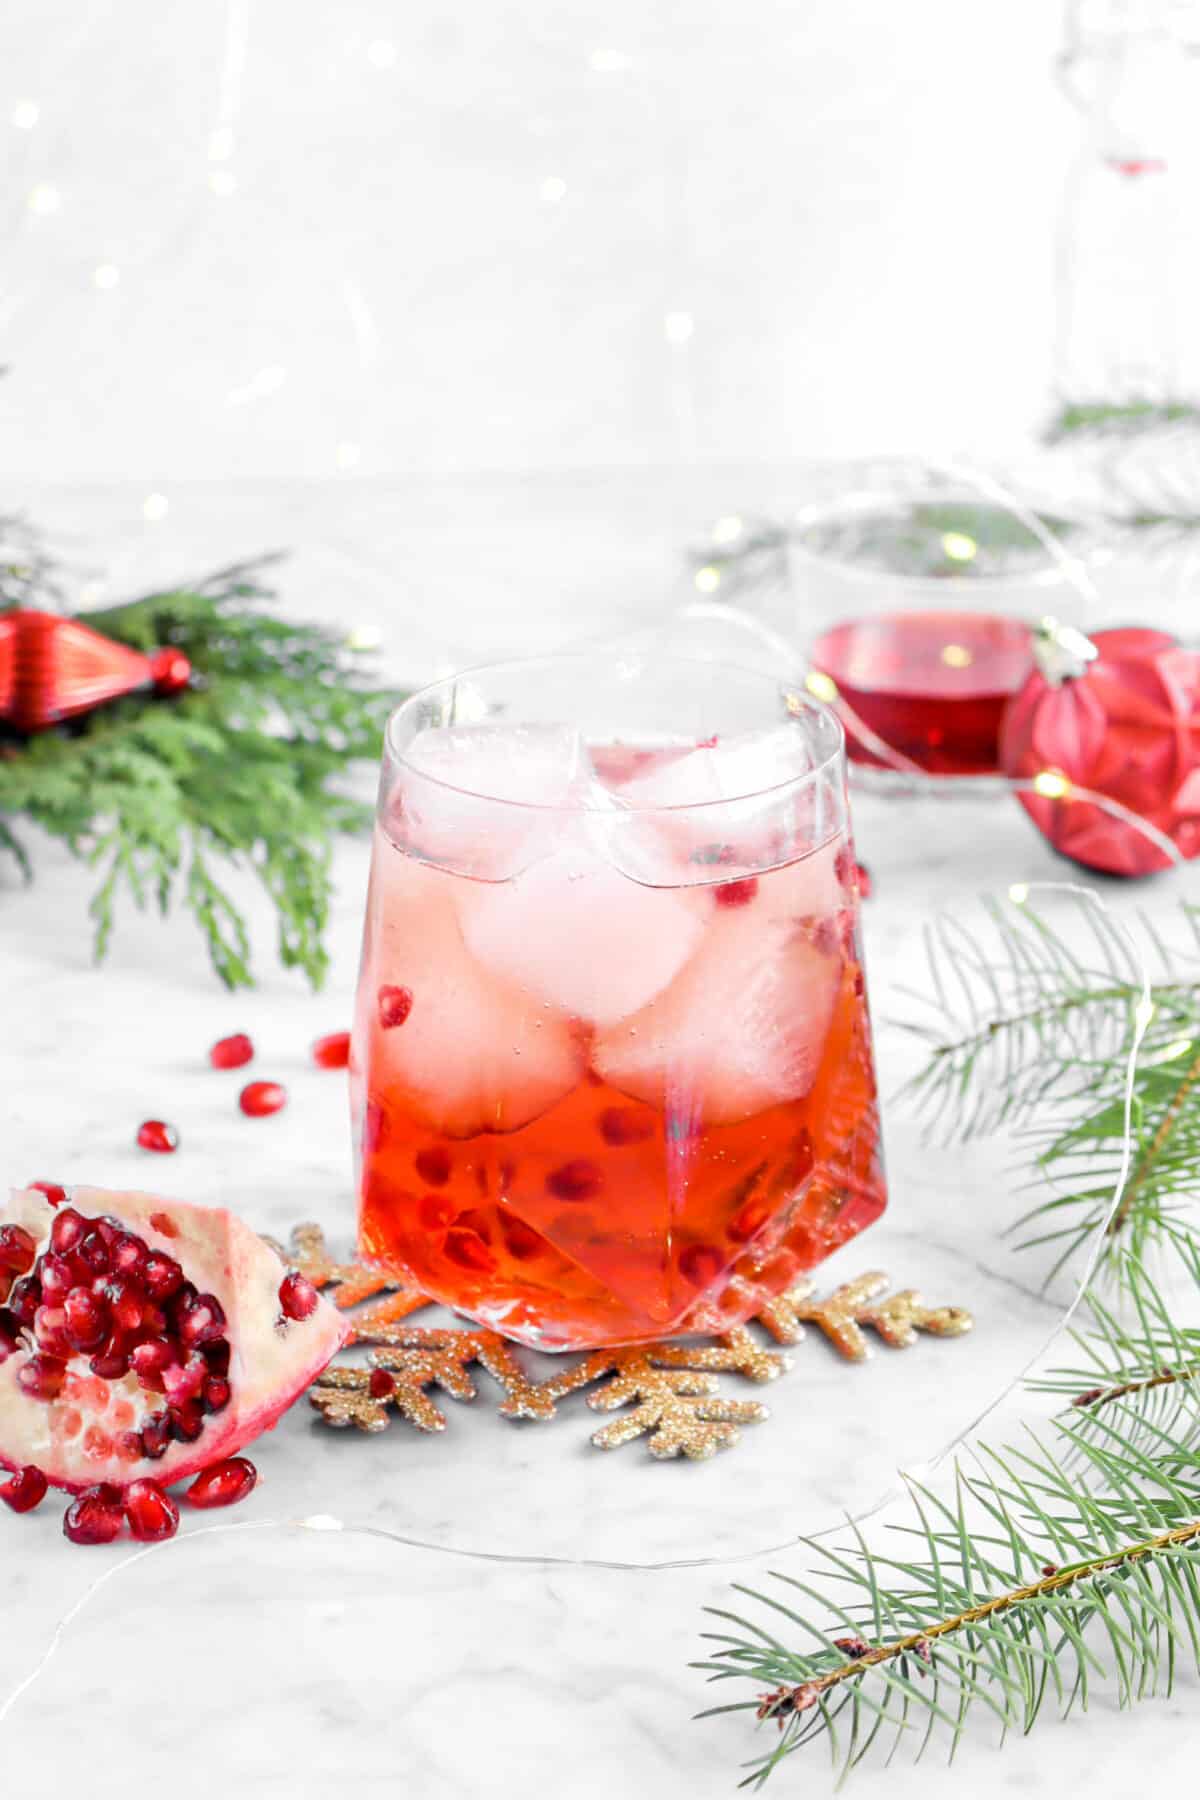 Pomegranate moscow mule with ornaments, greenery, fairy lights, and pomegranate wedge